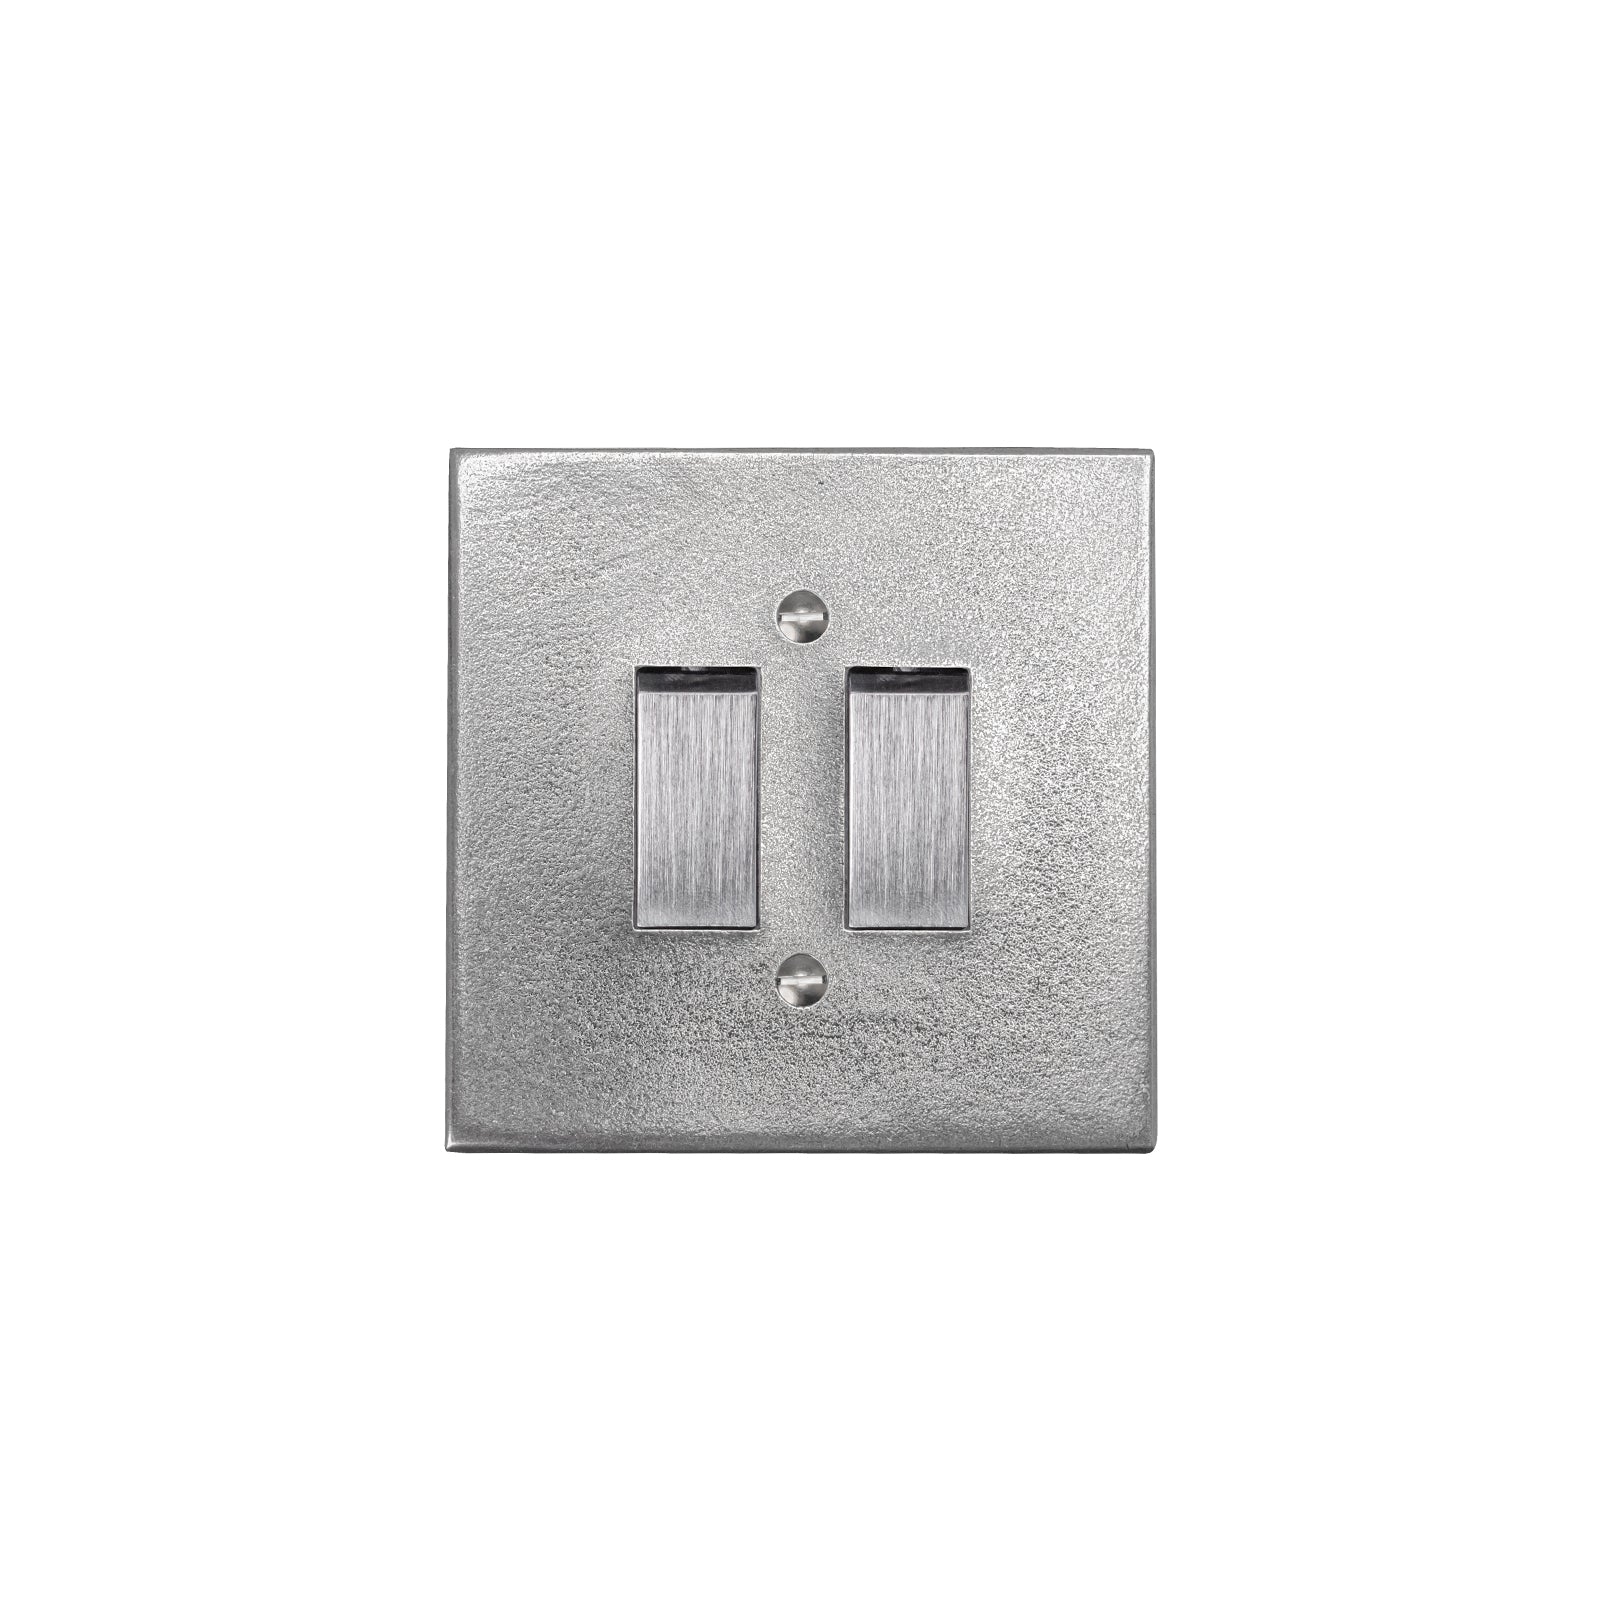 Pewter 2 Gang Light Switch